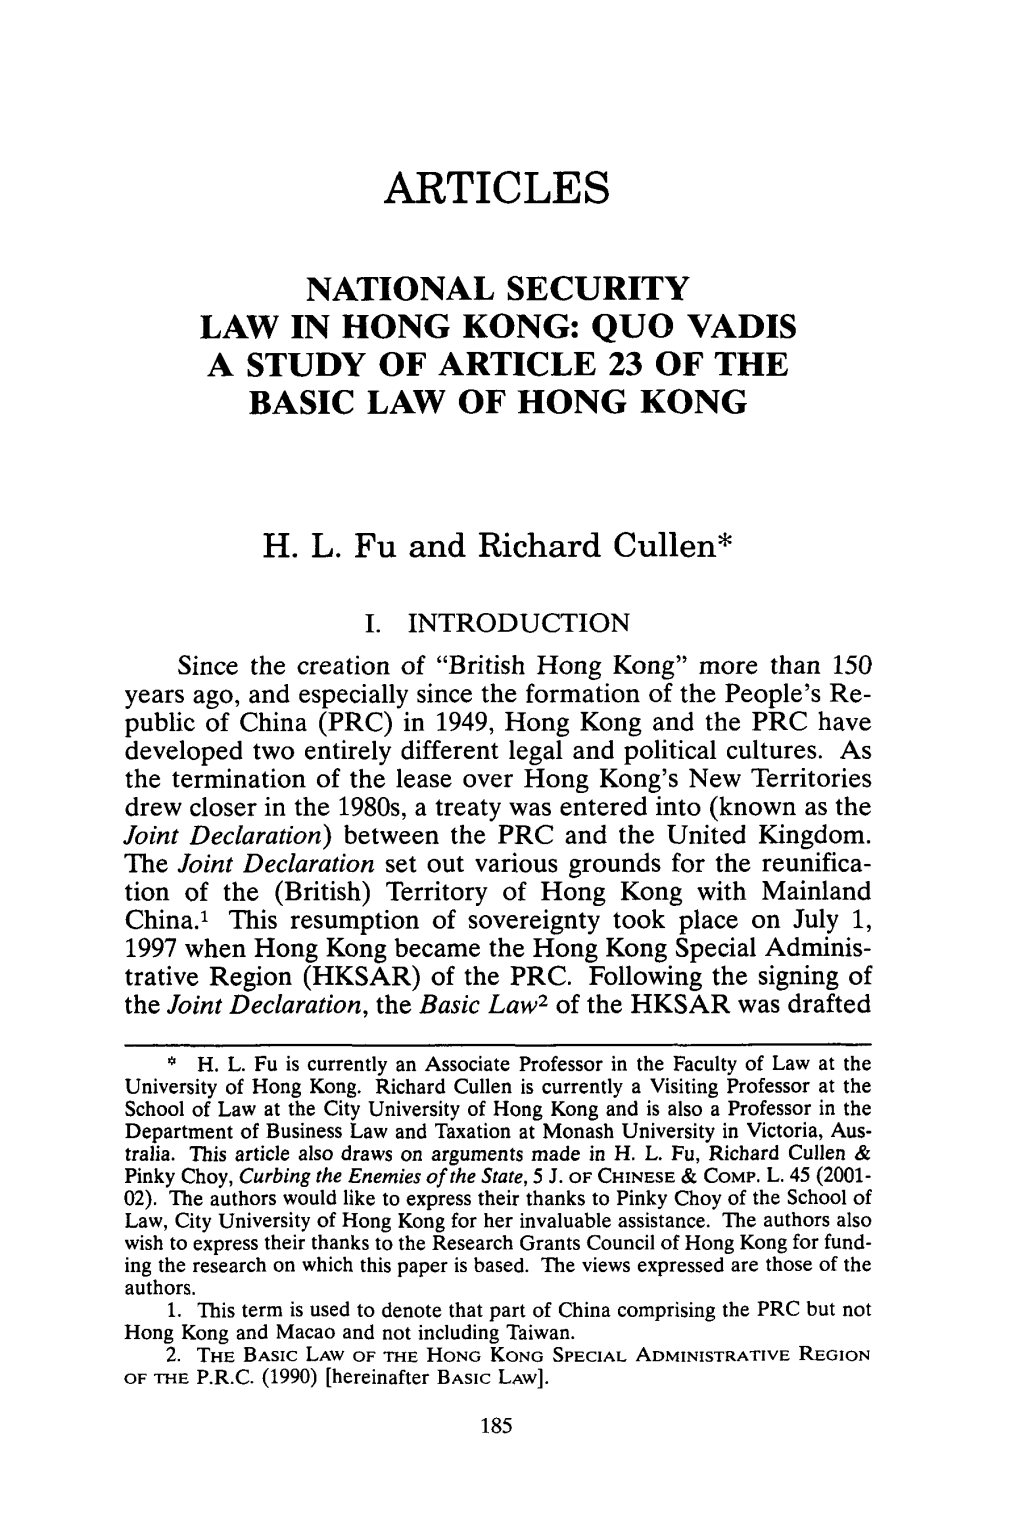 A Study of Article 23 of the Basic Law of Hong Kong